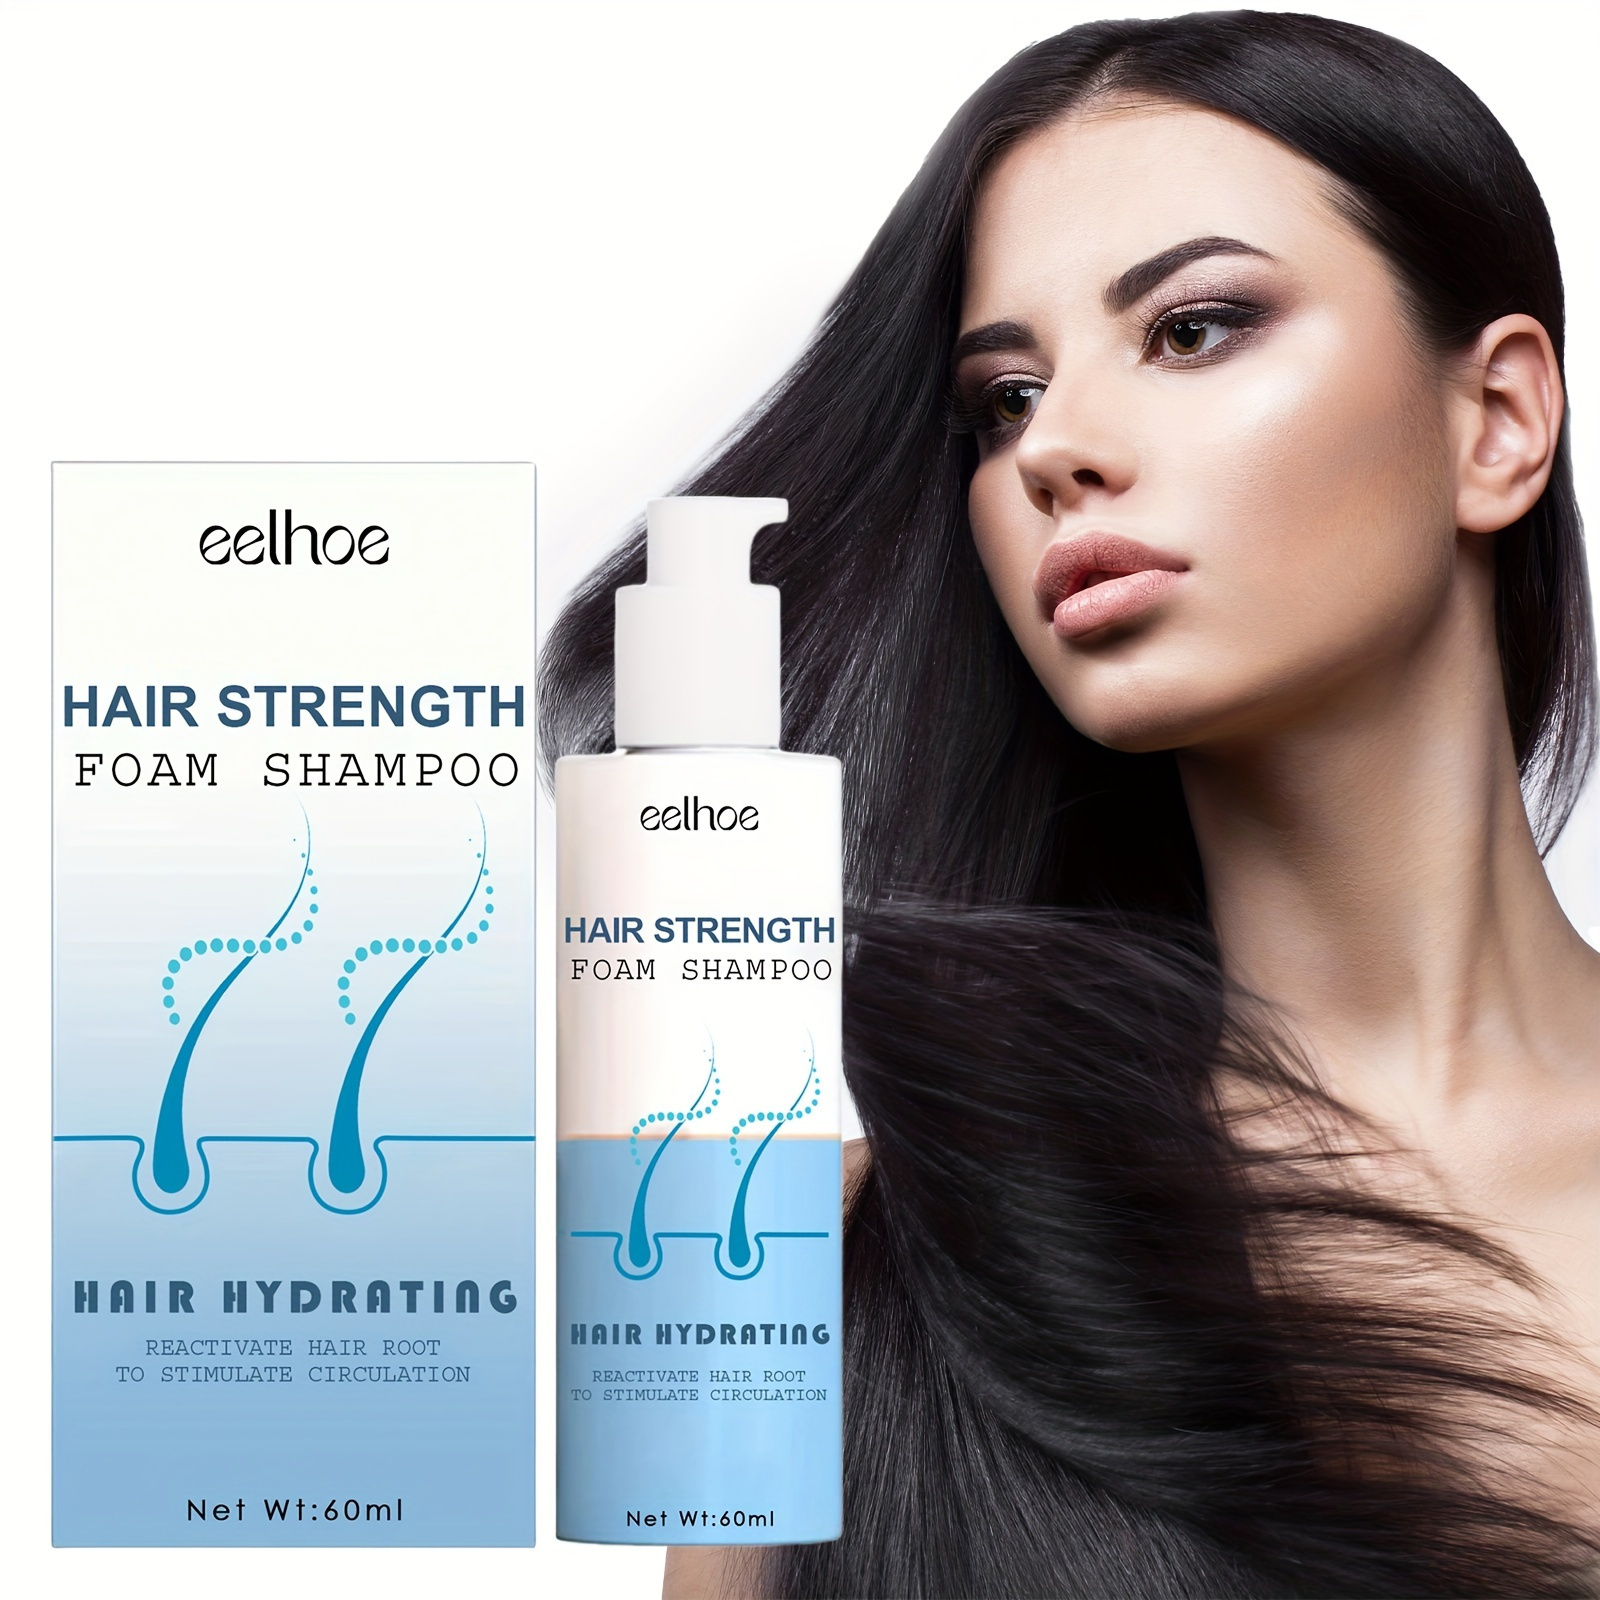 

Hair Strength Foam Shampoo, Hydrating And Smoothing Hair, Oil Controal, Refreshing Hair Shampoo For Women Men